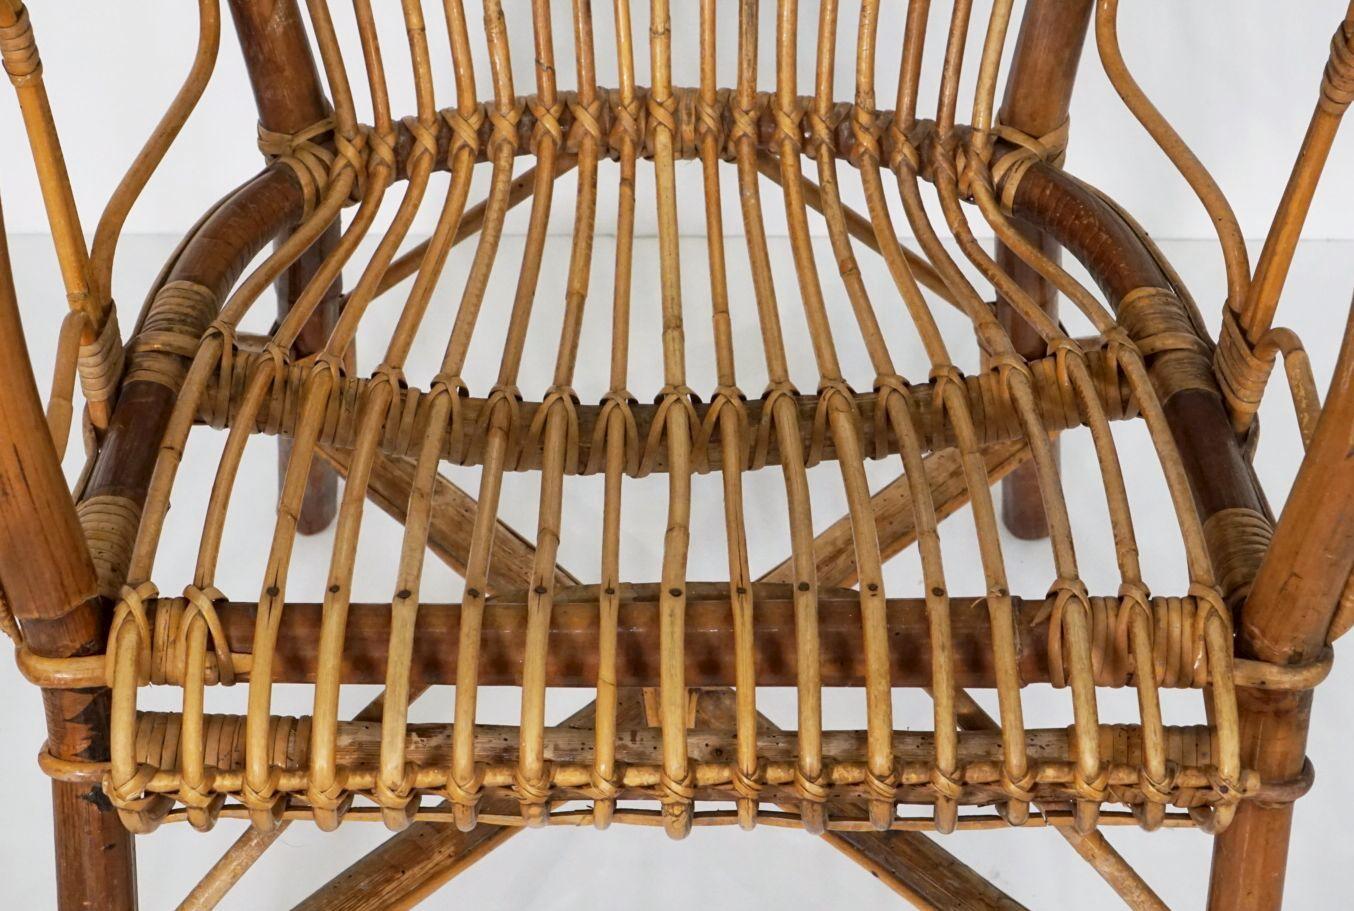 Italian Fan-Backed Arm Chairs of Rattan and Bamboo from the Mid-20th Century For Sale 5